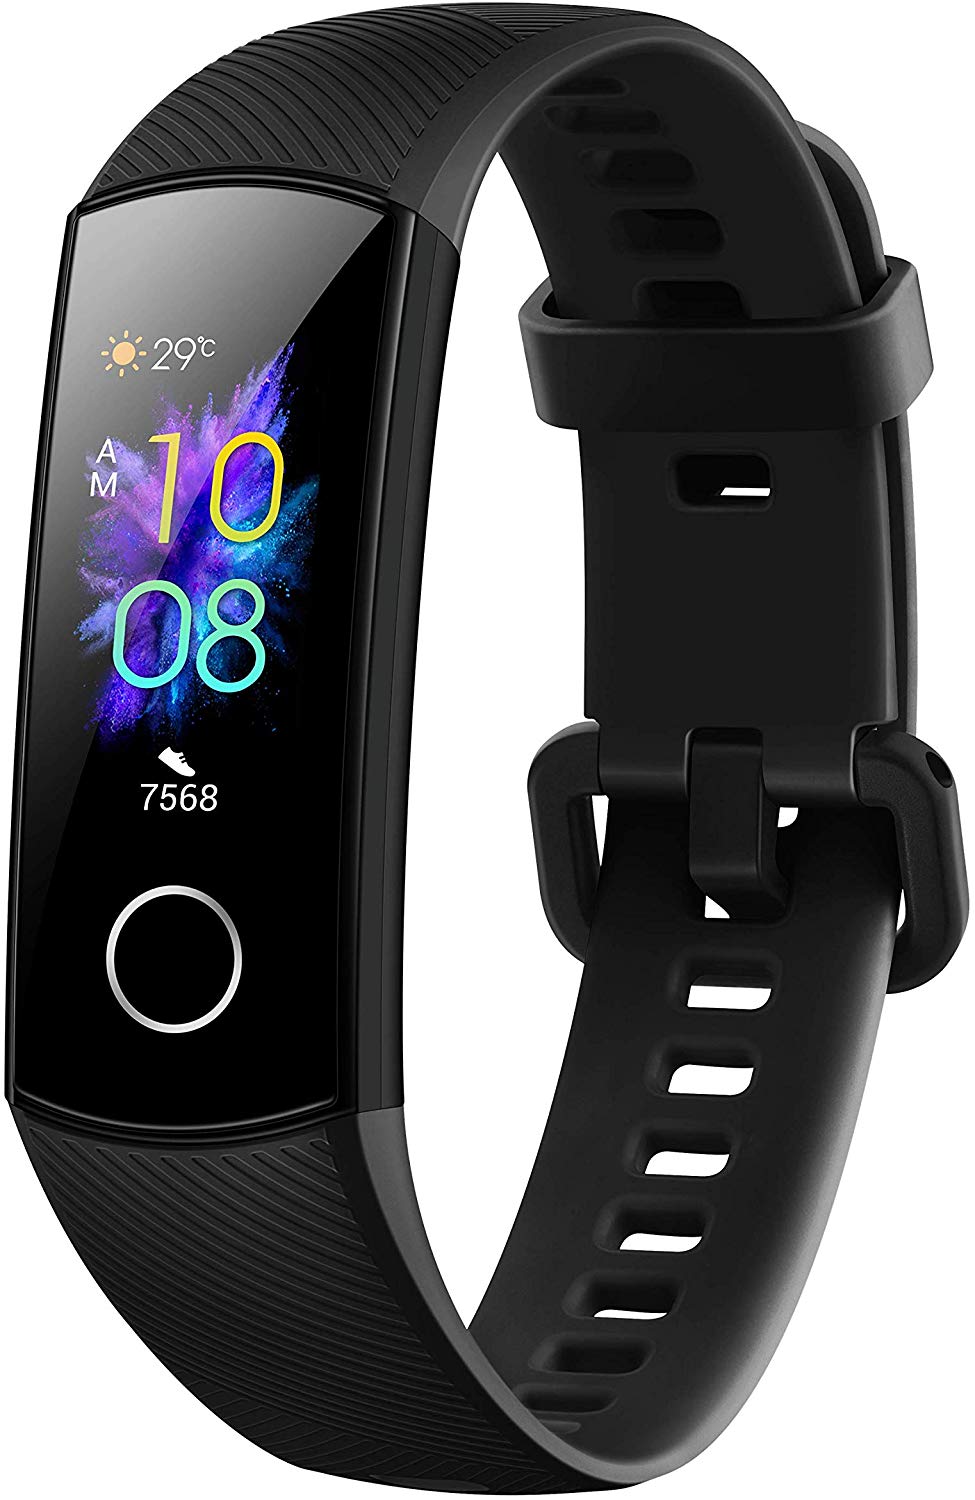 Honor Band 5 vs Honor Band 5i: Which Fitness Tracker is Right for You?